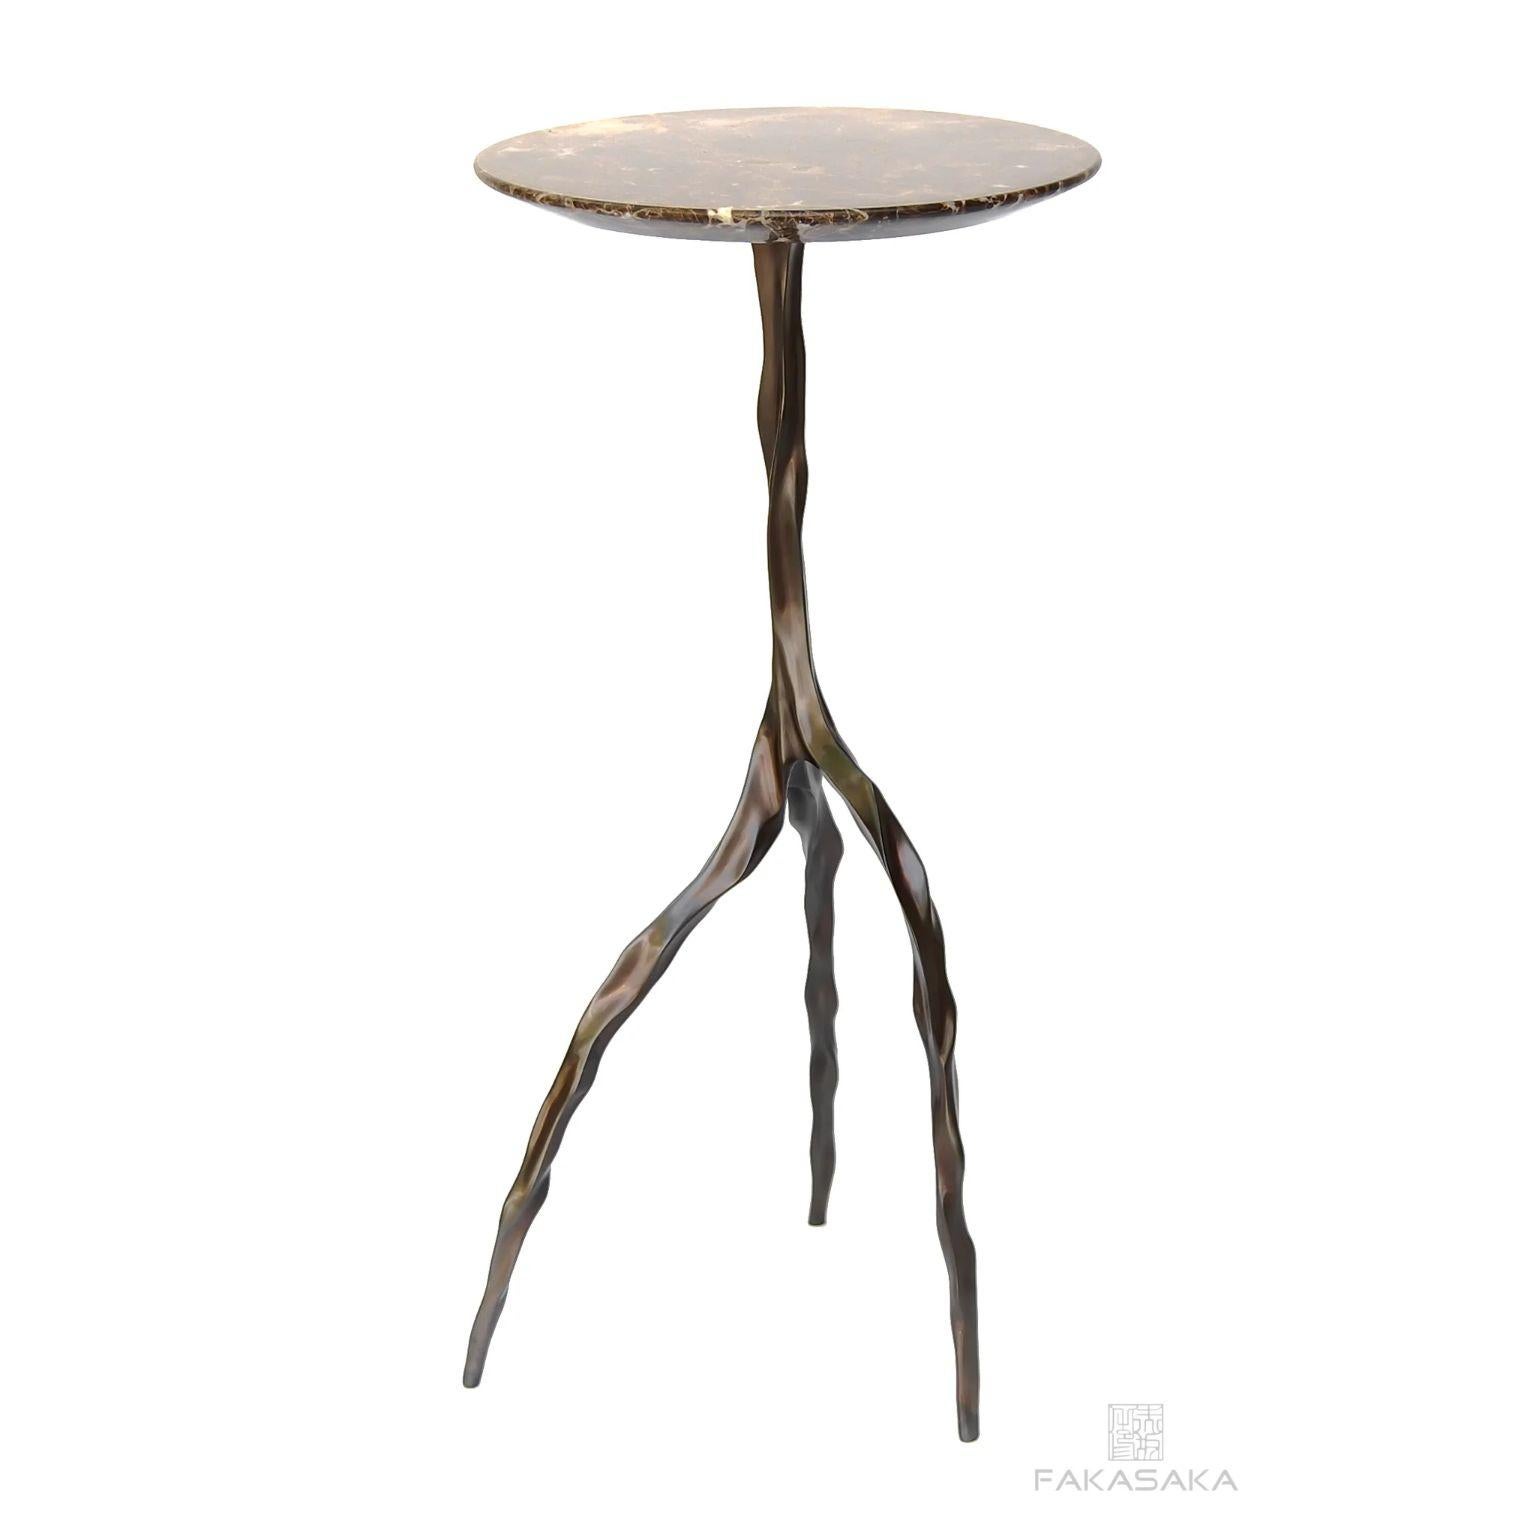 Brazilian Nina Drink Table with Marrom Imperial Marble Top by Fakasaka Design For Sale